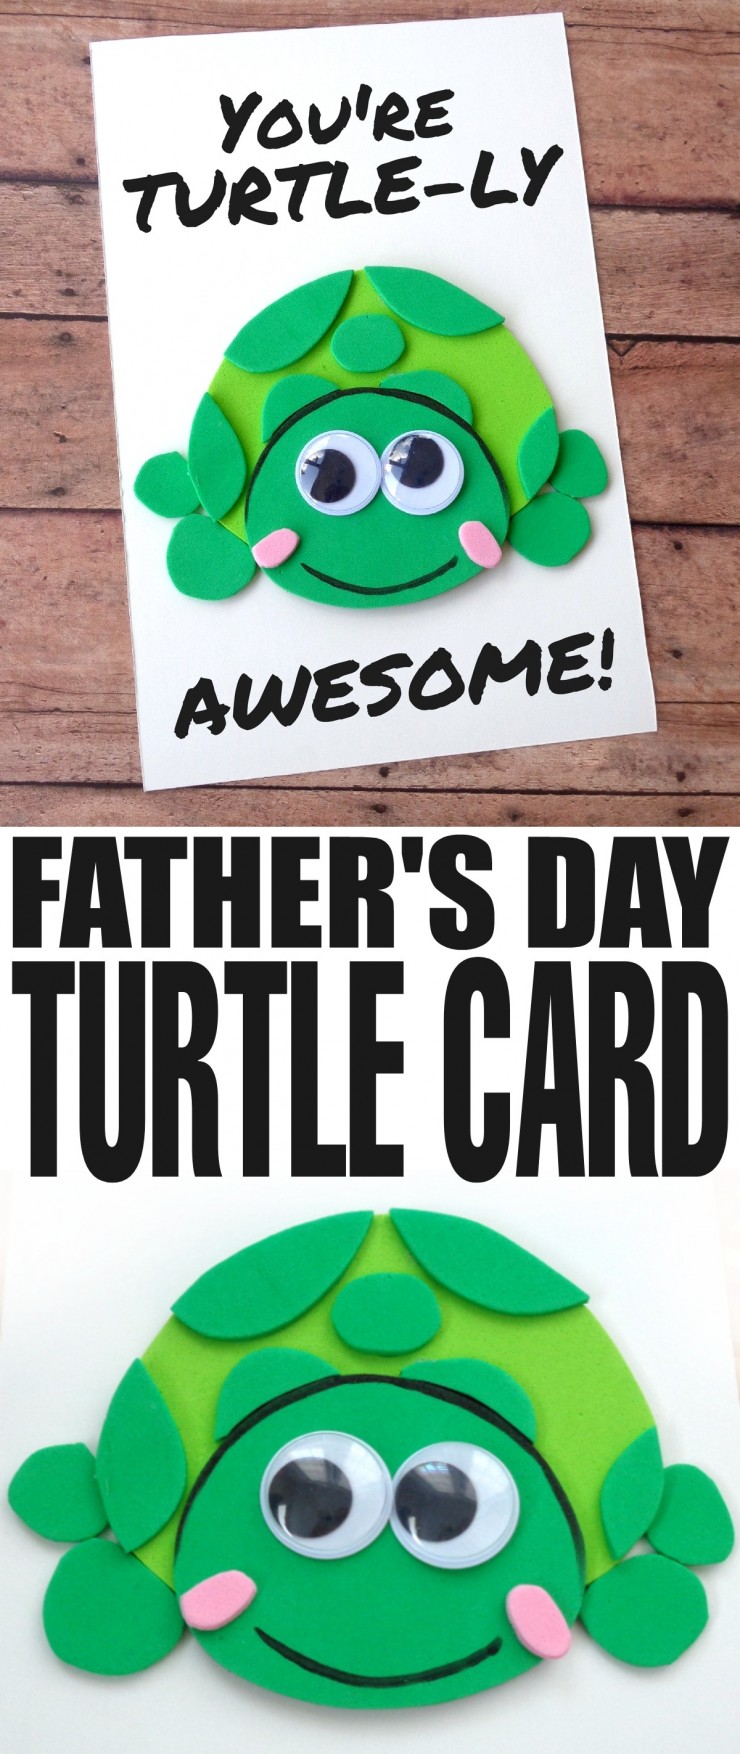 Father’s Day is coming up and while it can be difficult to figure out what colour of tie to get for Dad for Father’s Day, a hand made card is always going to be a hit. This DIY Father’s Day Turtle Card is the perfect way to show Dad that he is TURTLE-LY AWESOME!